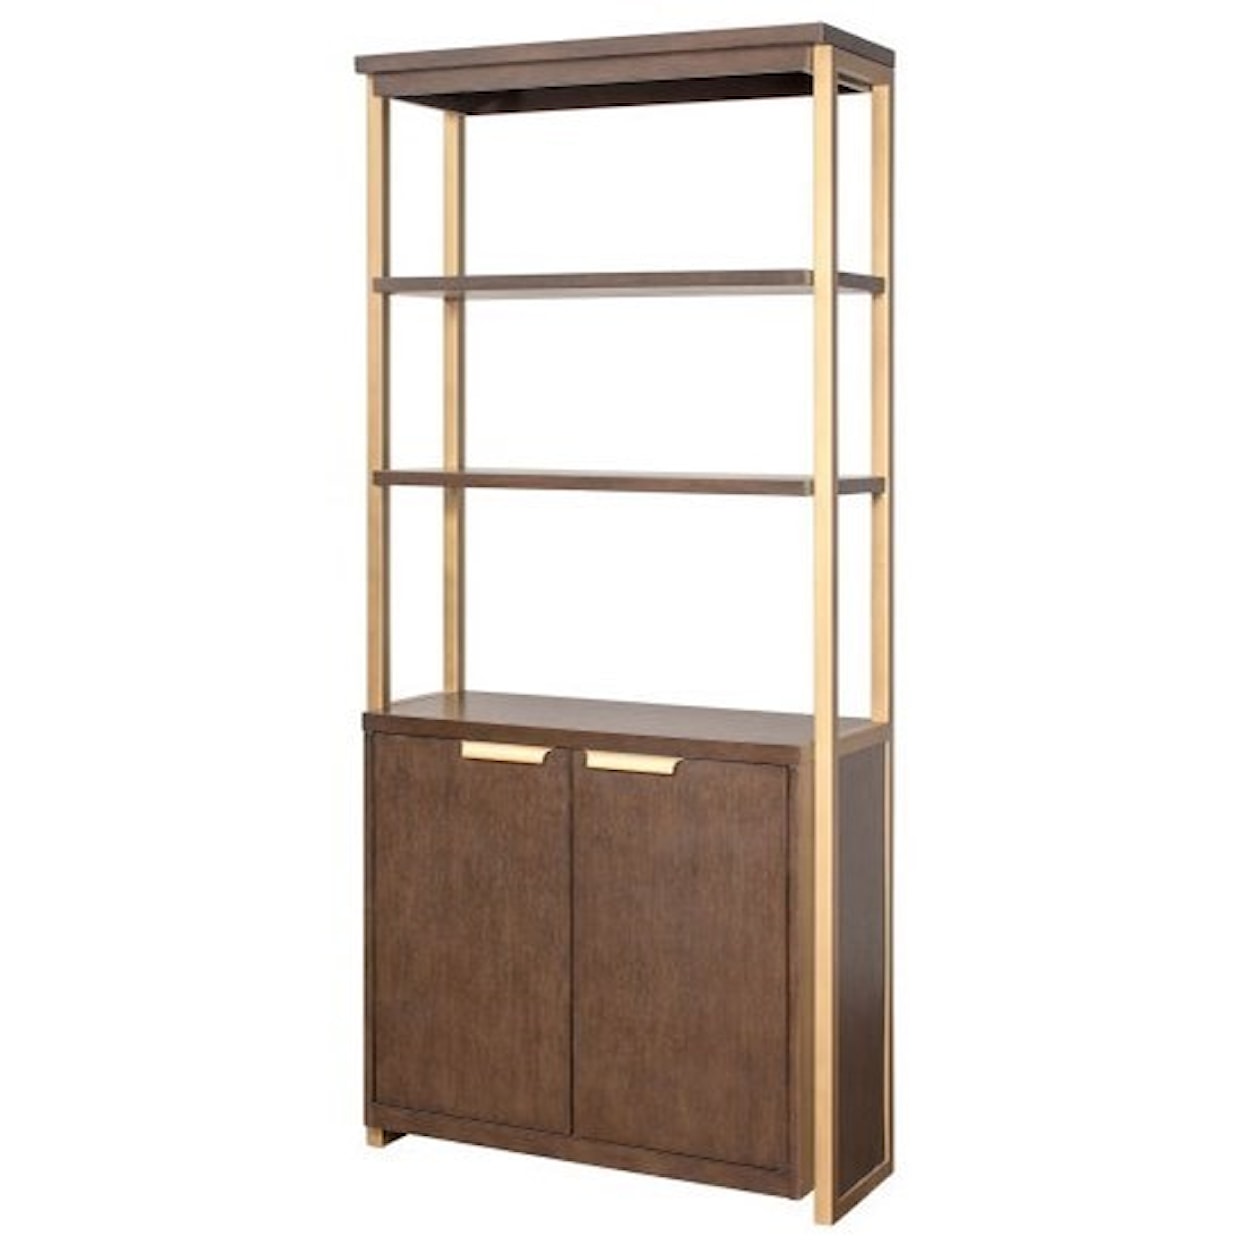 Martin Home Furnishings Axis Lower Door Bookcase